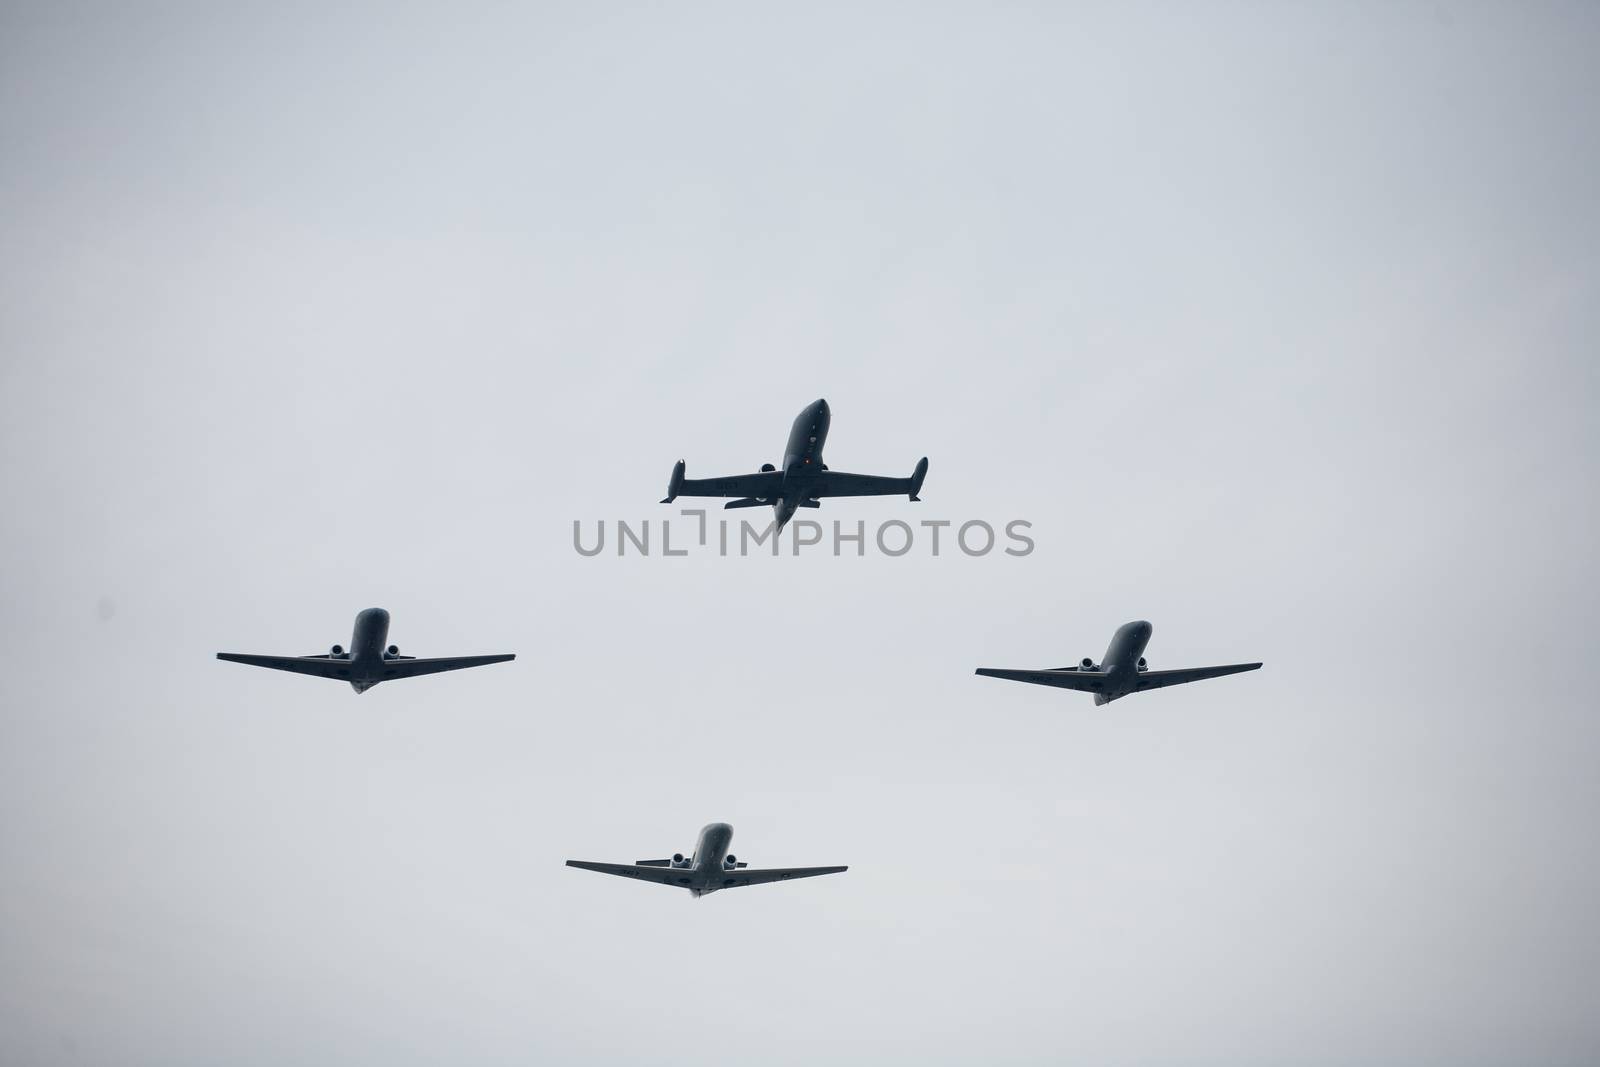 CHILE, Santiago: Military planes of the Chilean Air Force flew over Santiago in formation to celebrate the Day of the Glories of the Army, on September 19, 2015. 